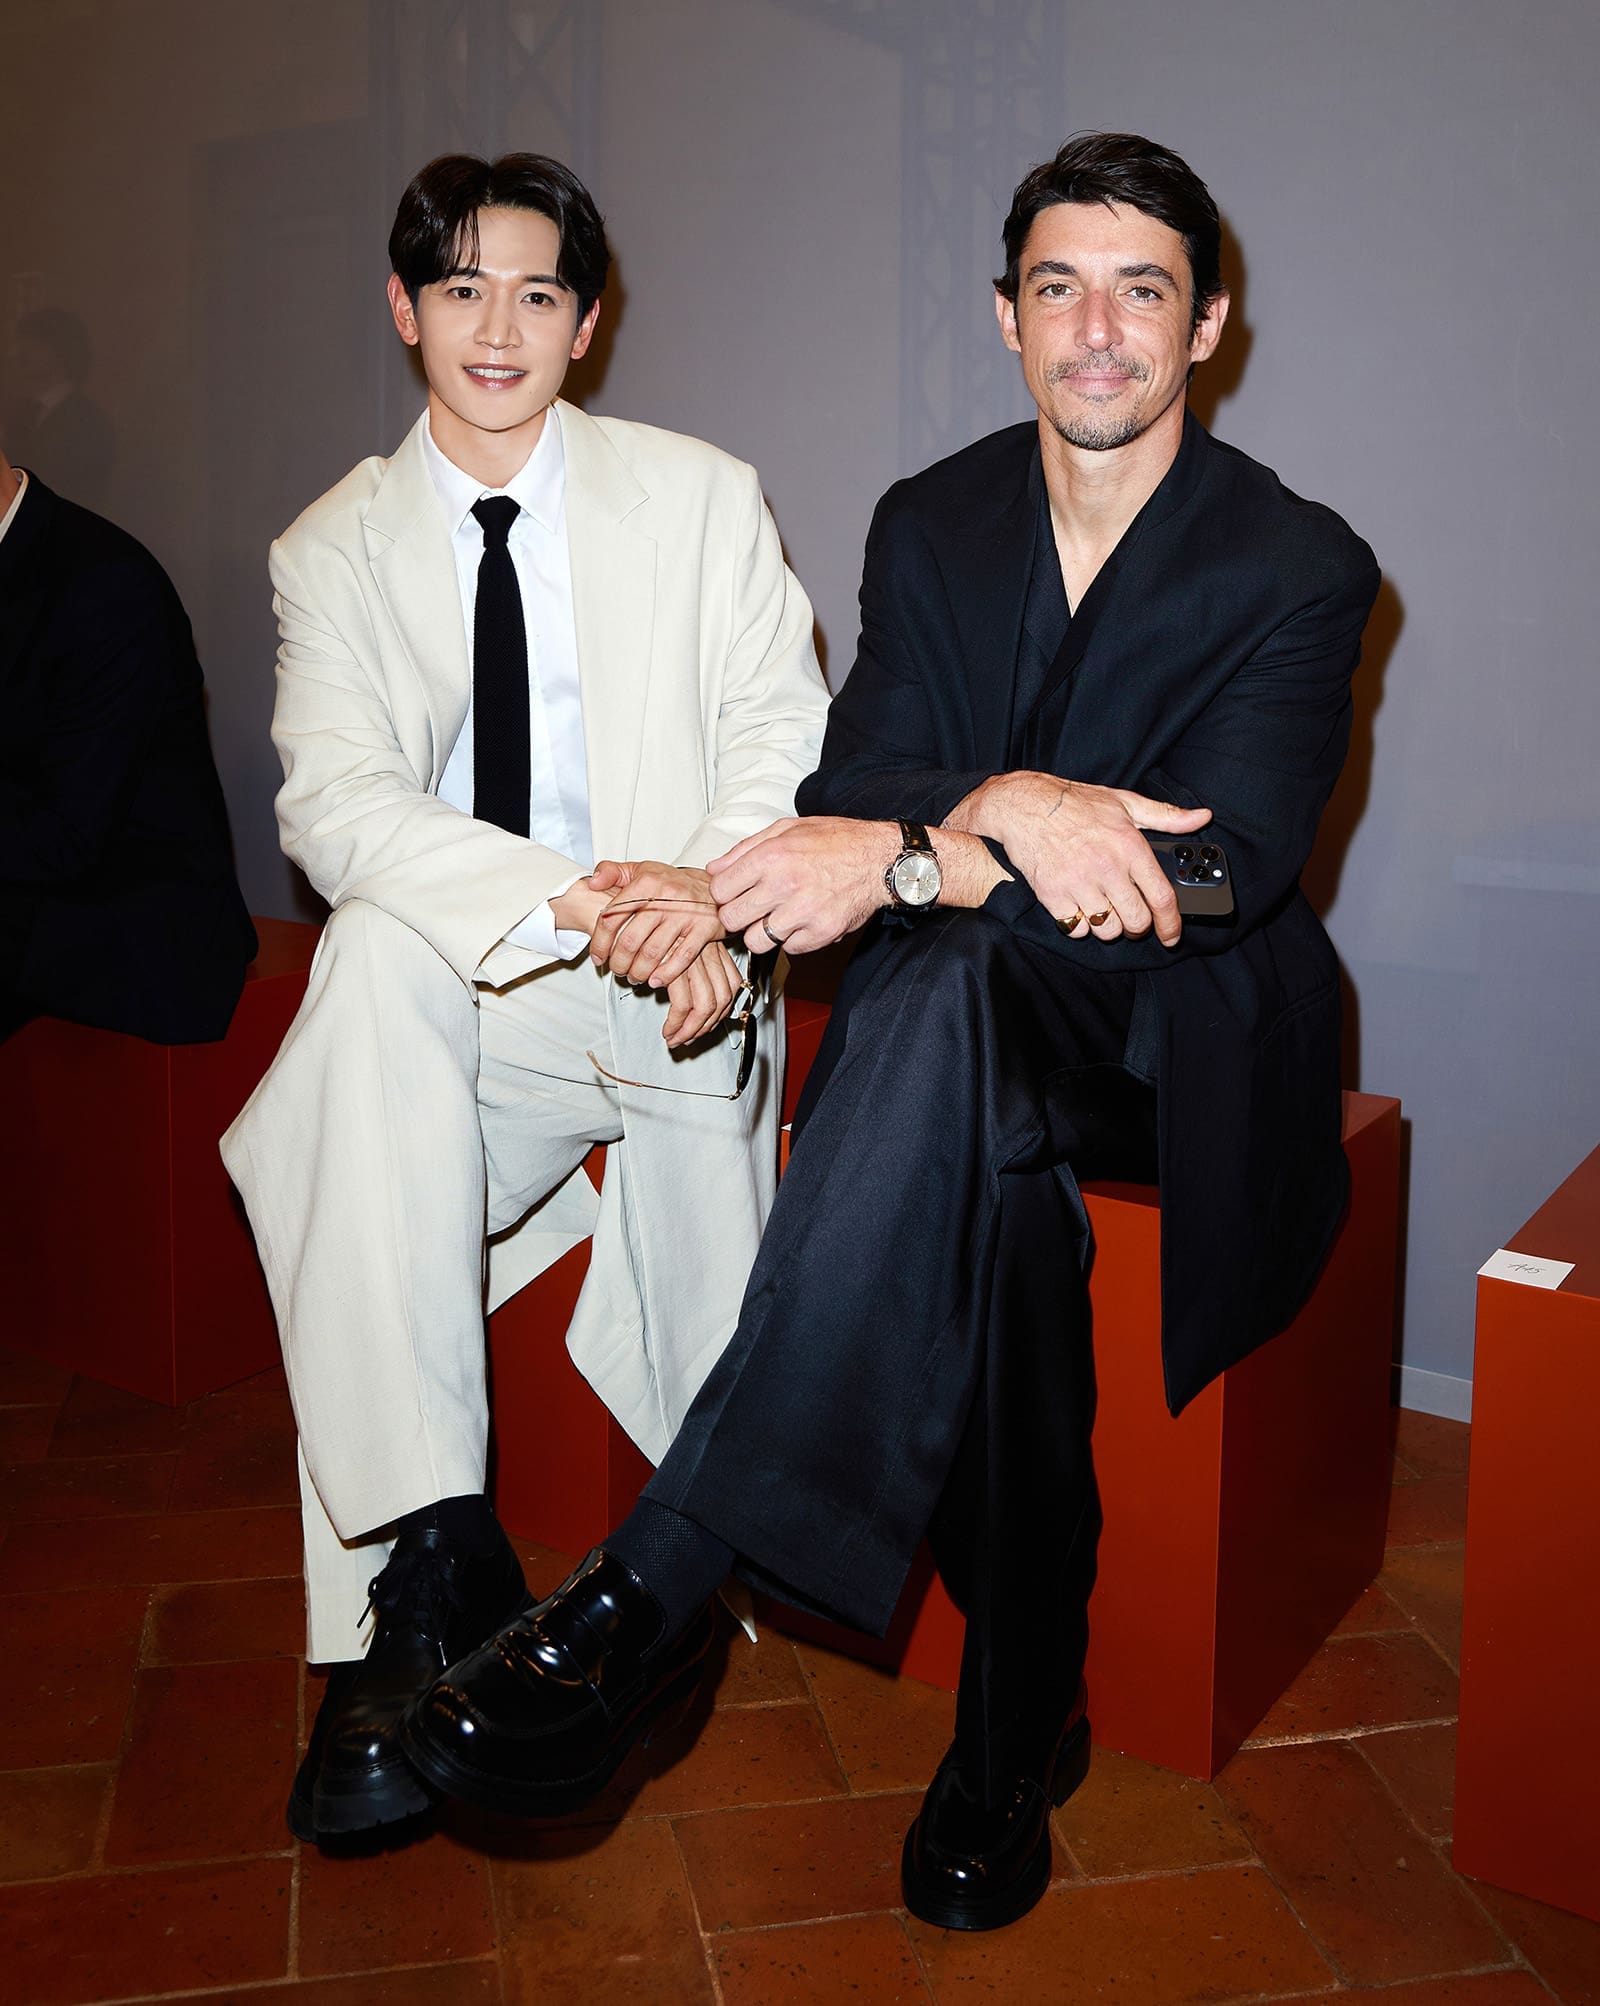 Minho Choi and Alberto Guerra in white and black ensembles, respectively, at the COS Runway at Corsie Sistine, Italy